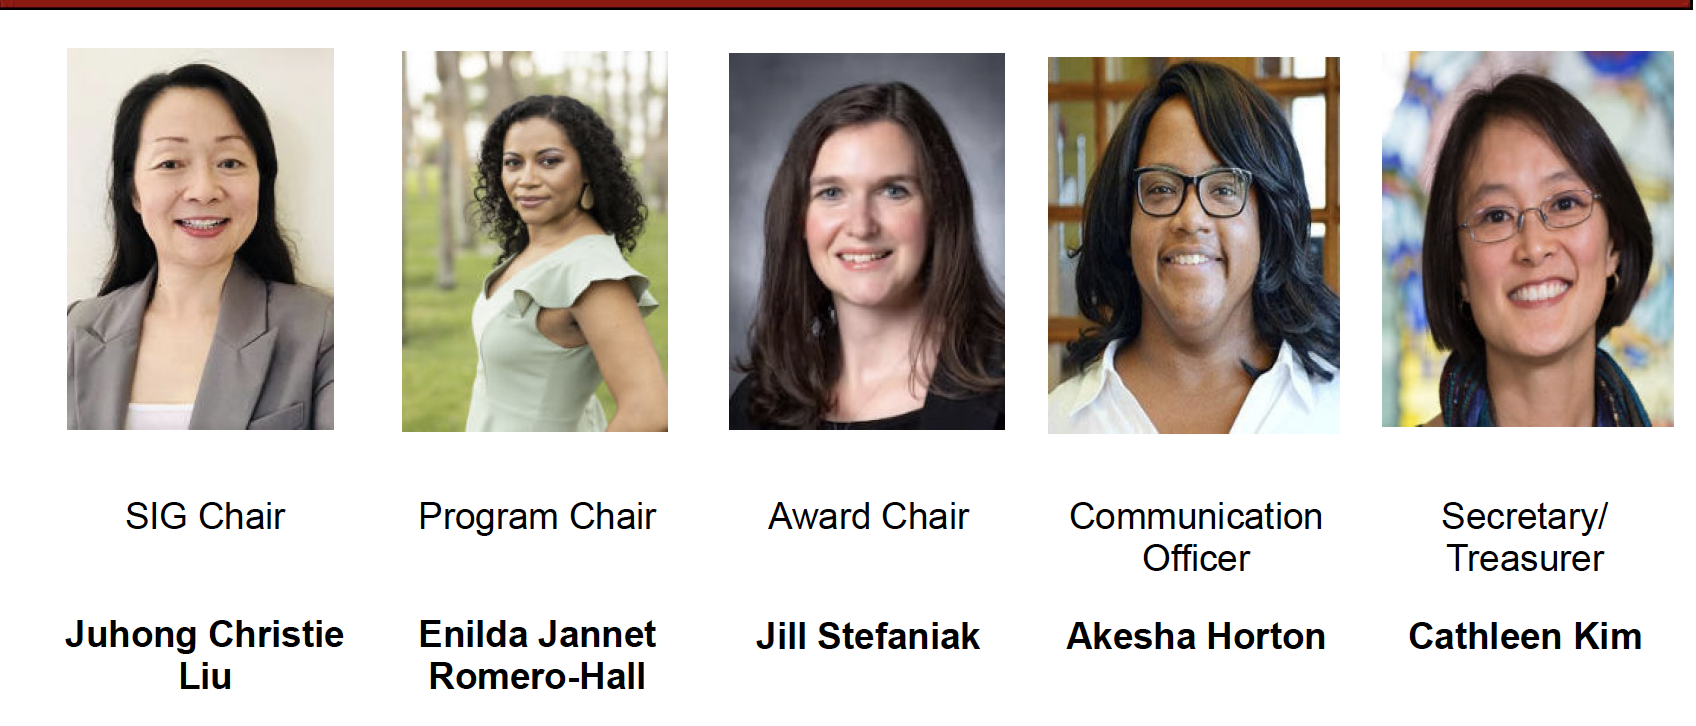 AERA Special Interest Group Instructional Technology Leadership five women of diverse appearance